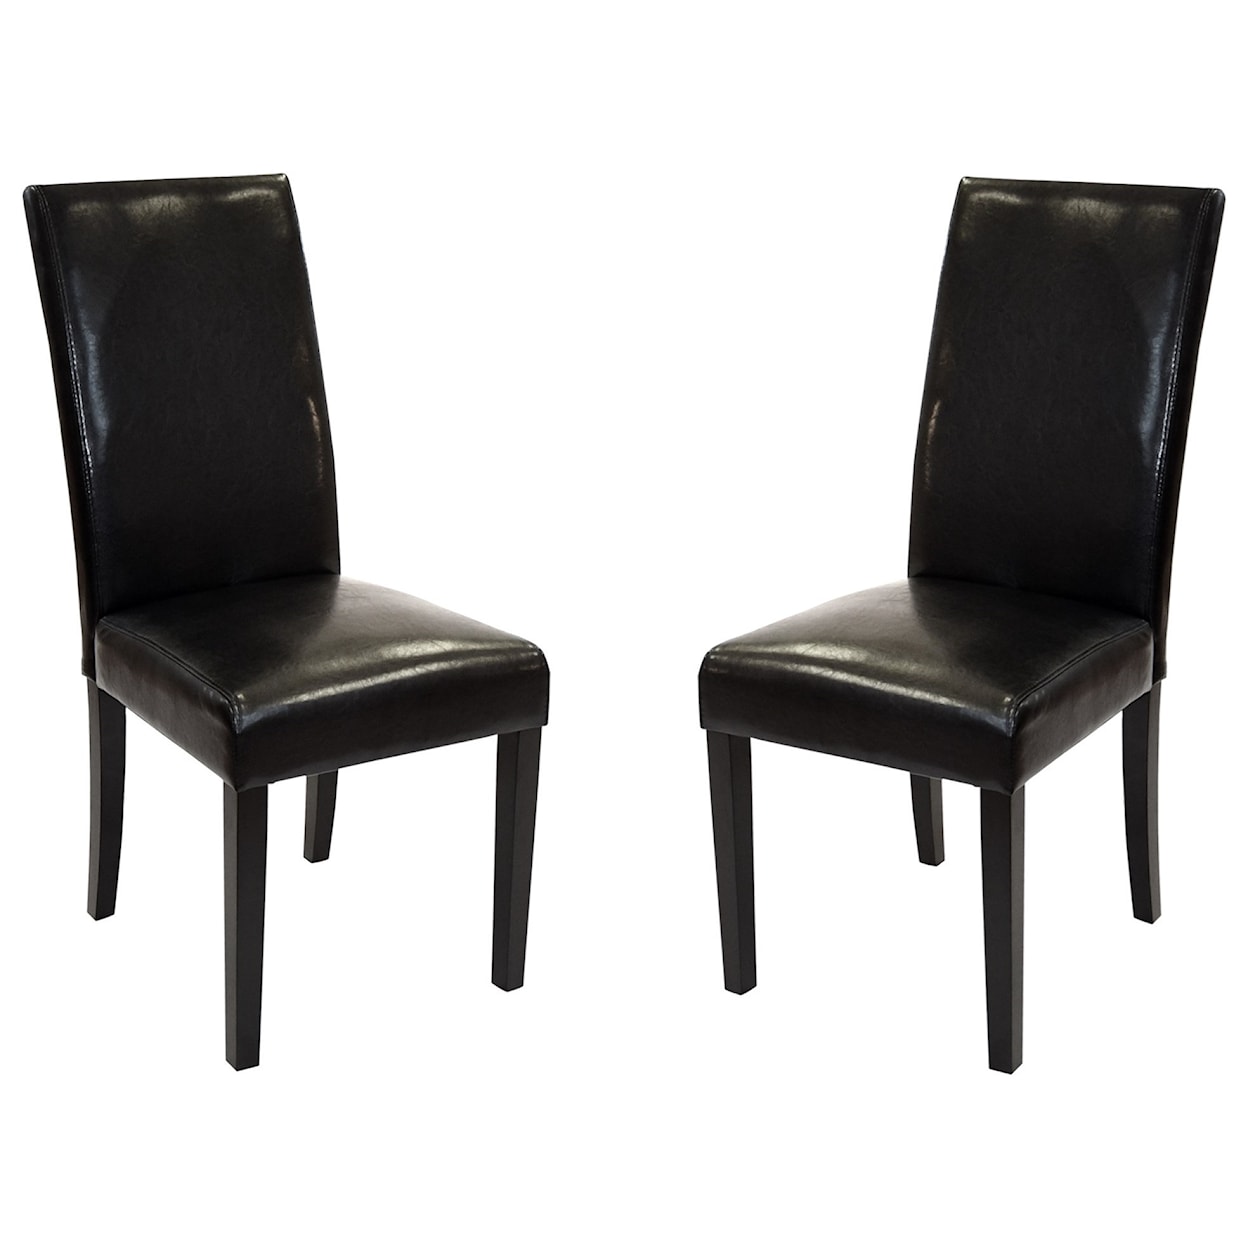 Armen Living MD-014  Set of 2 Side Chairs